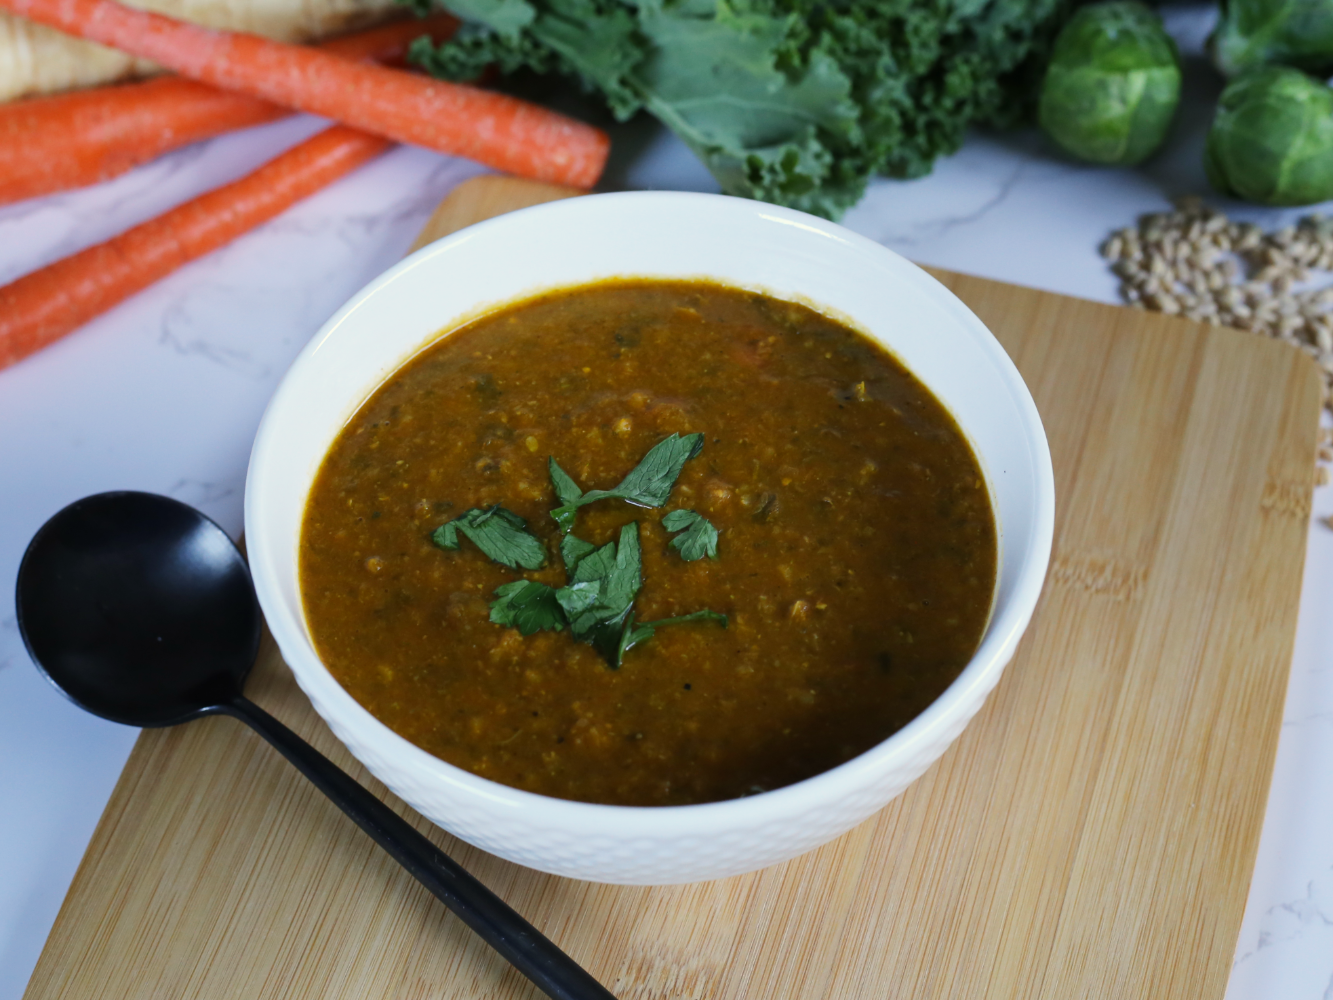 A delicious bowl of anti-inflammatory soup!